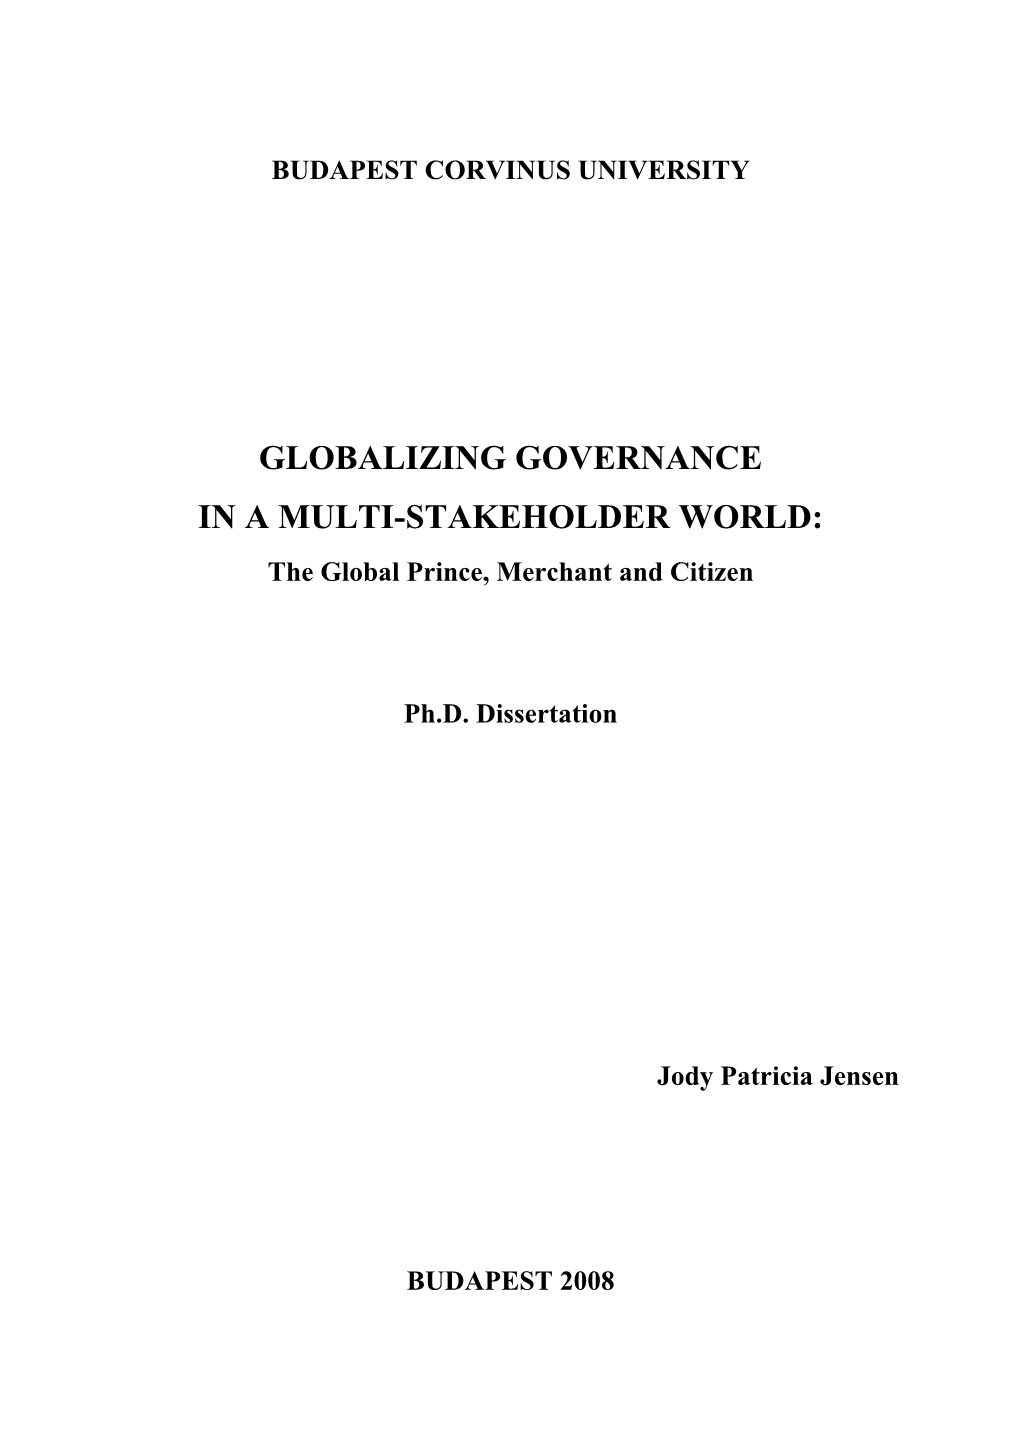 Globalizing Governance in a Multi-Stakeholder World: the Global Prince, Merchant, and Citizen